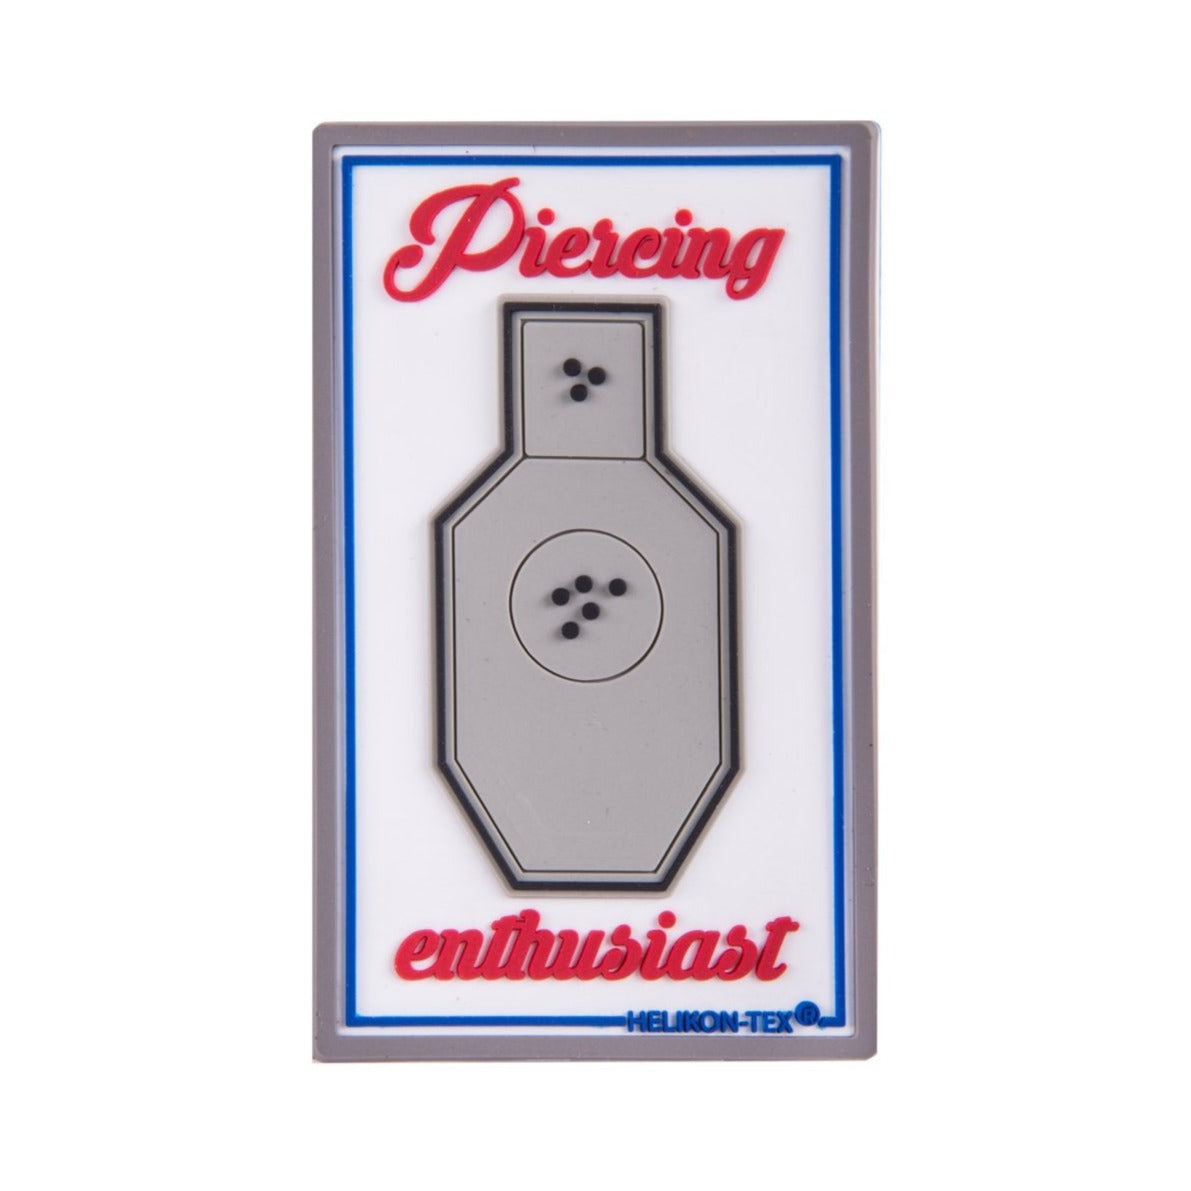 "Piercing Enthusiast" Rubber Patch